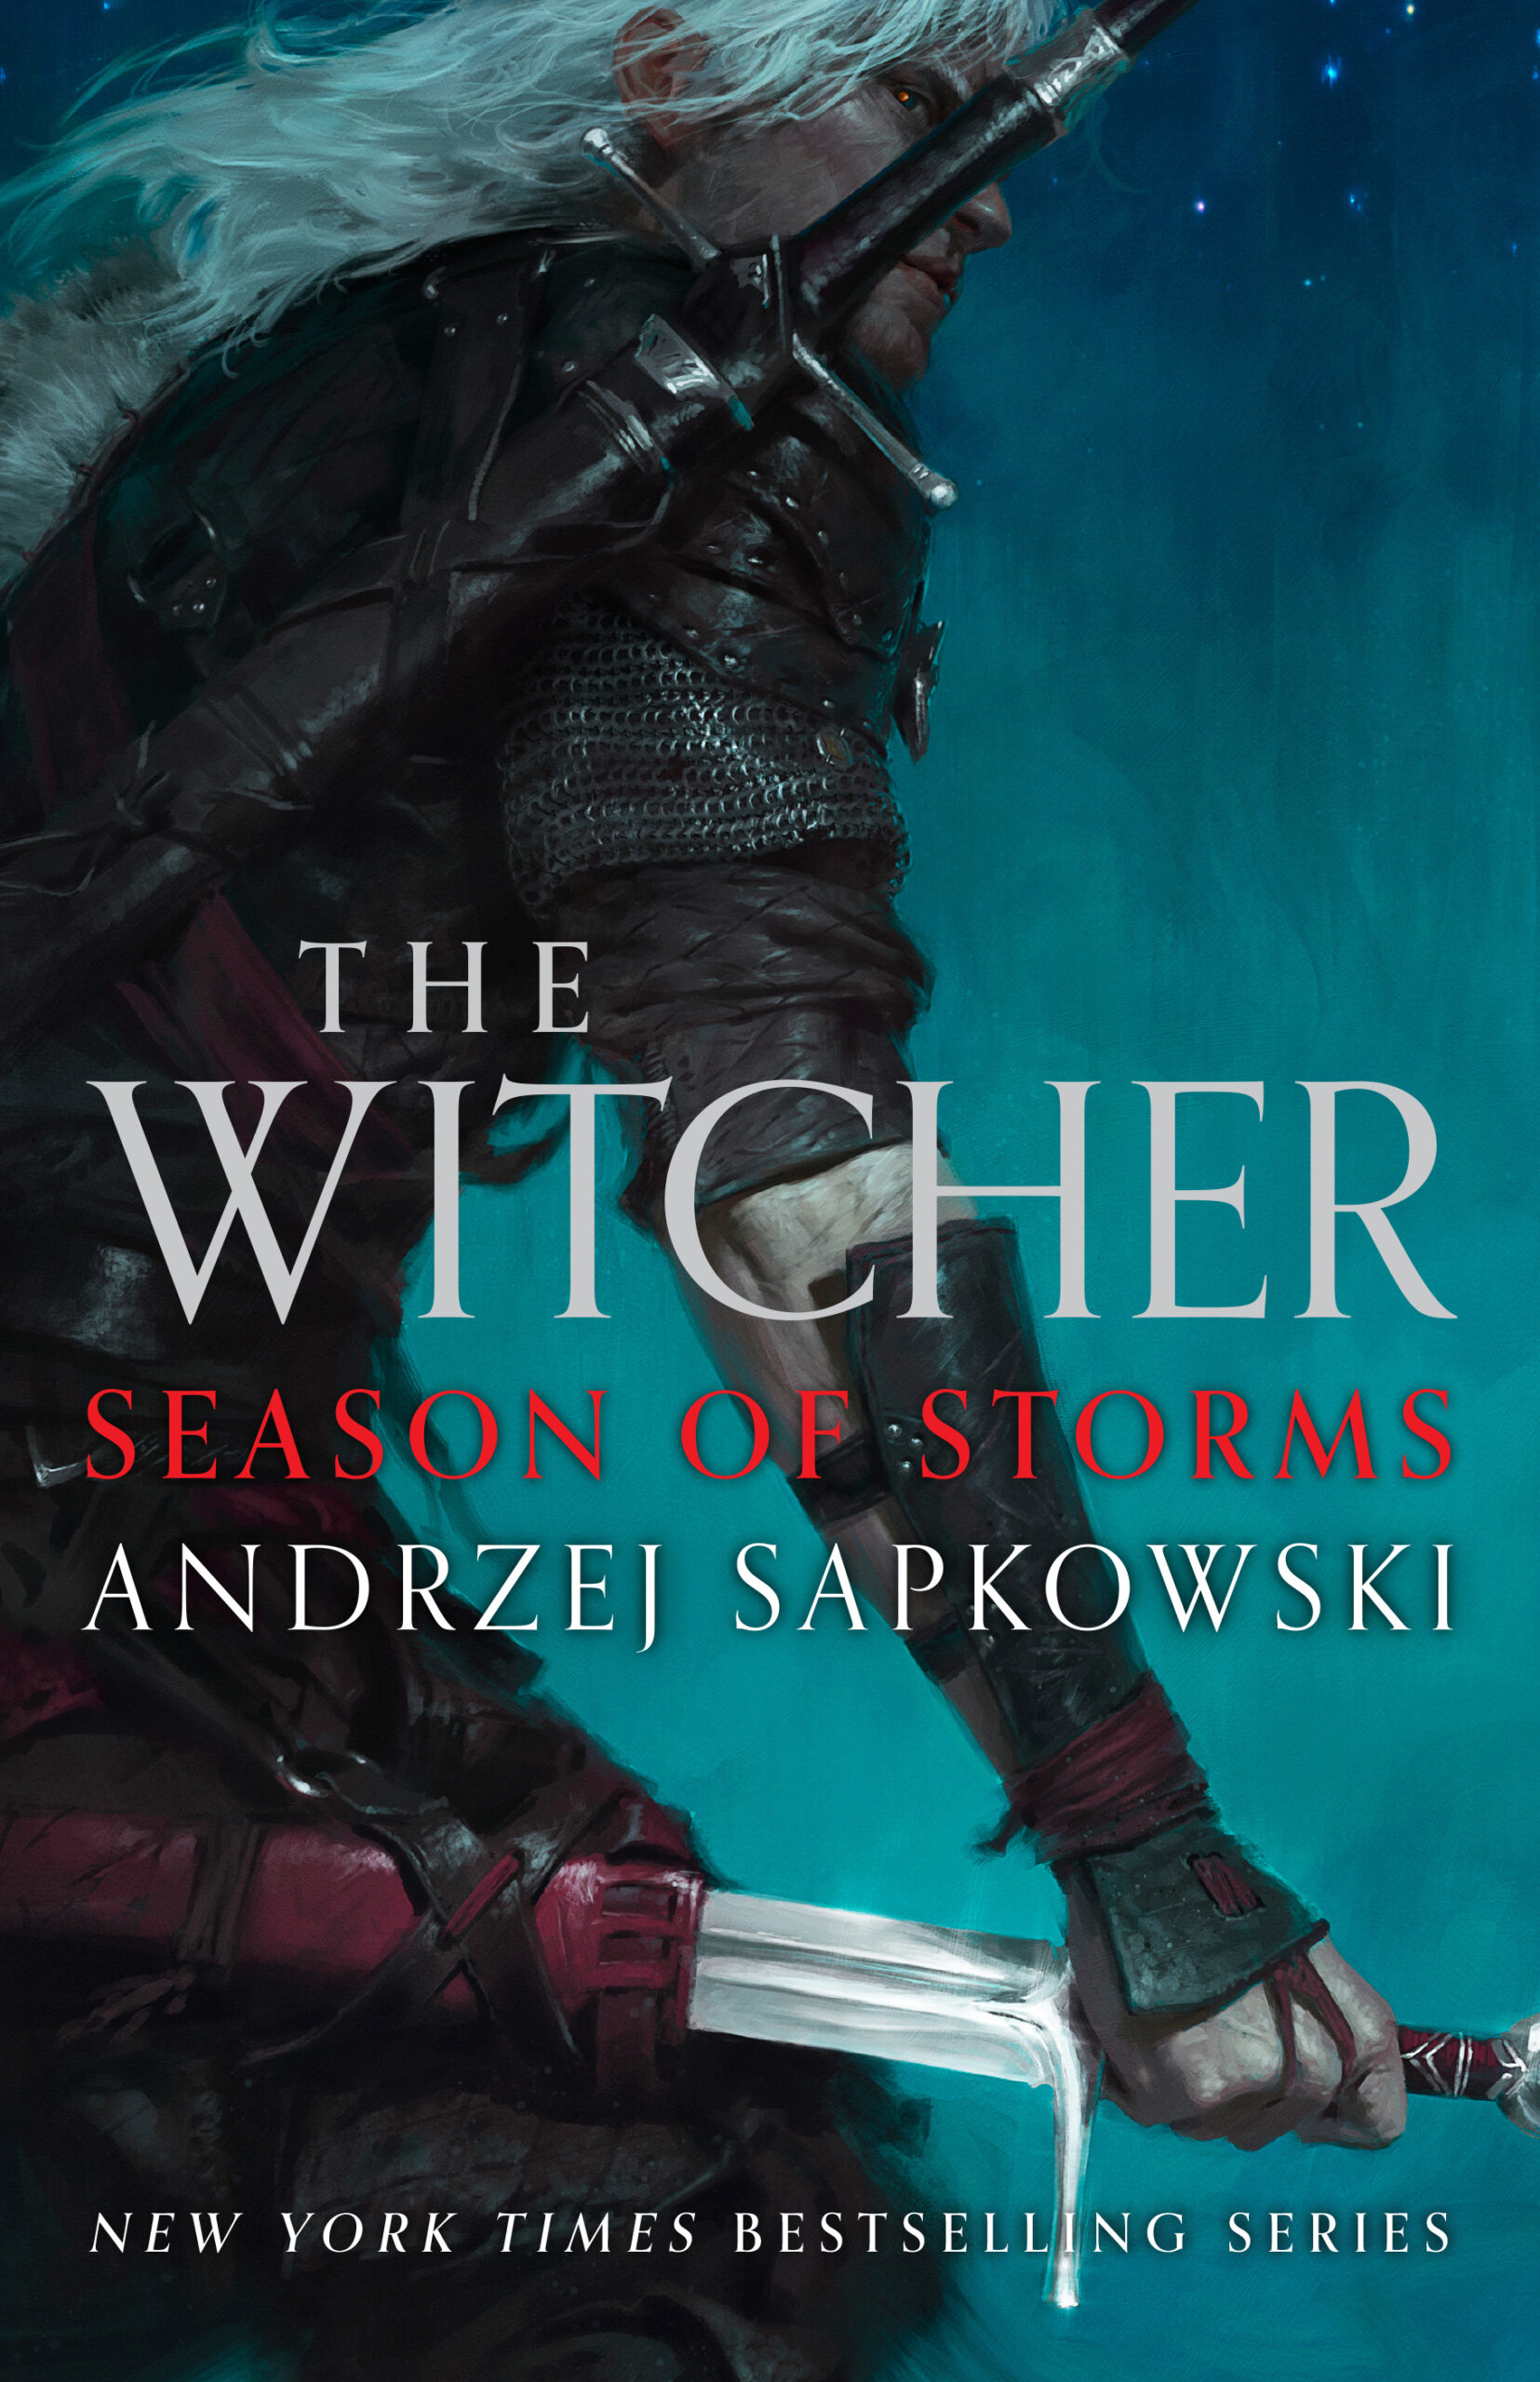 the witcher series book review